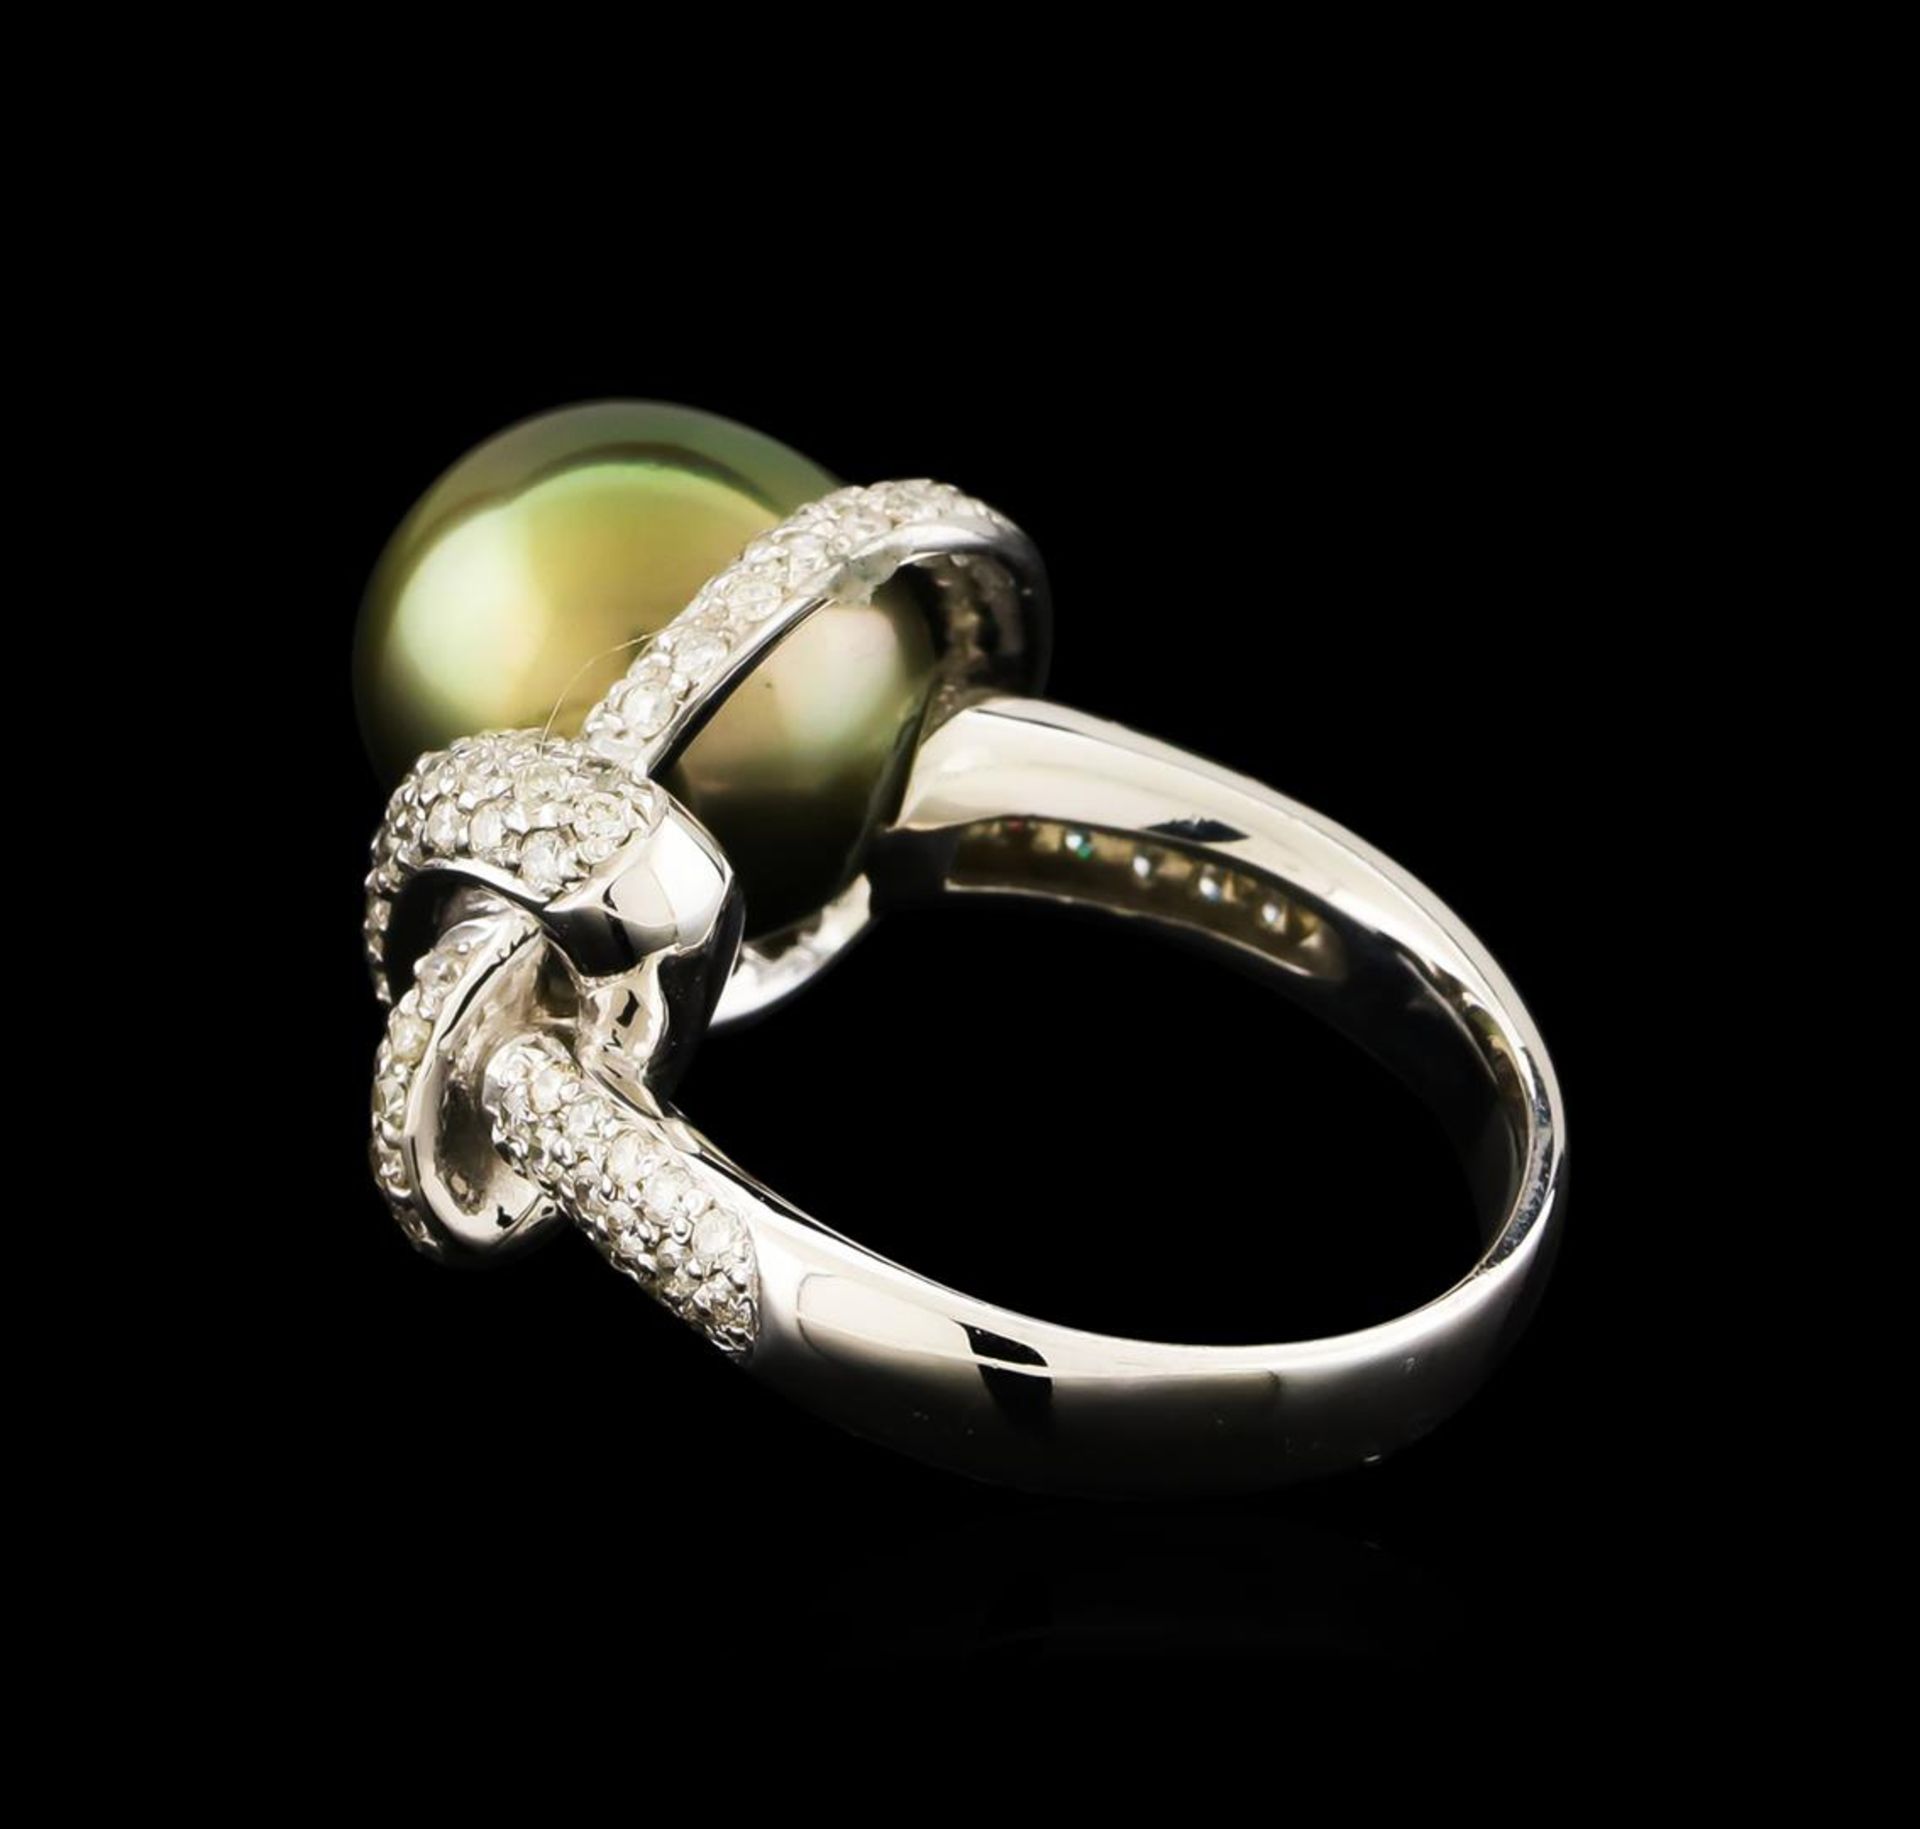 Tahitian Pearl and Diamond Ring - 14KT White Gold - Image 3 of 5